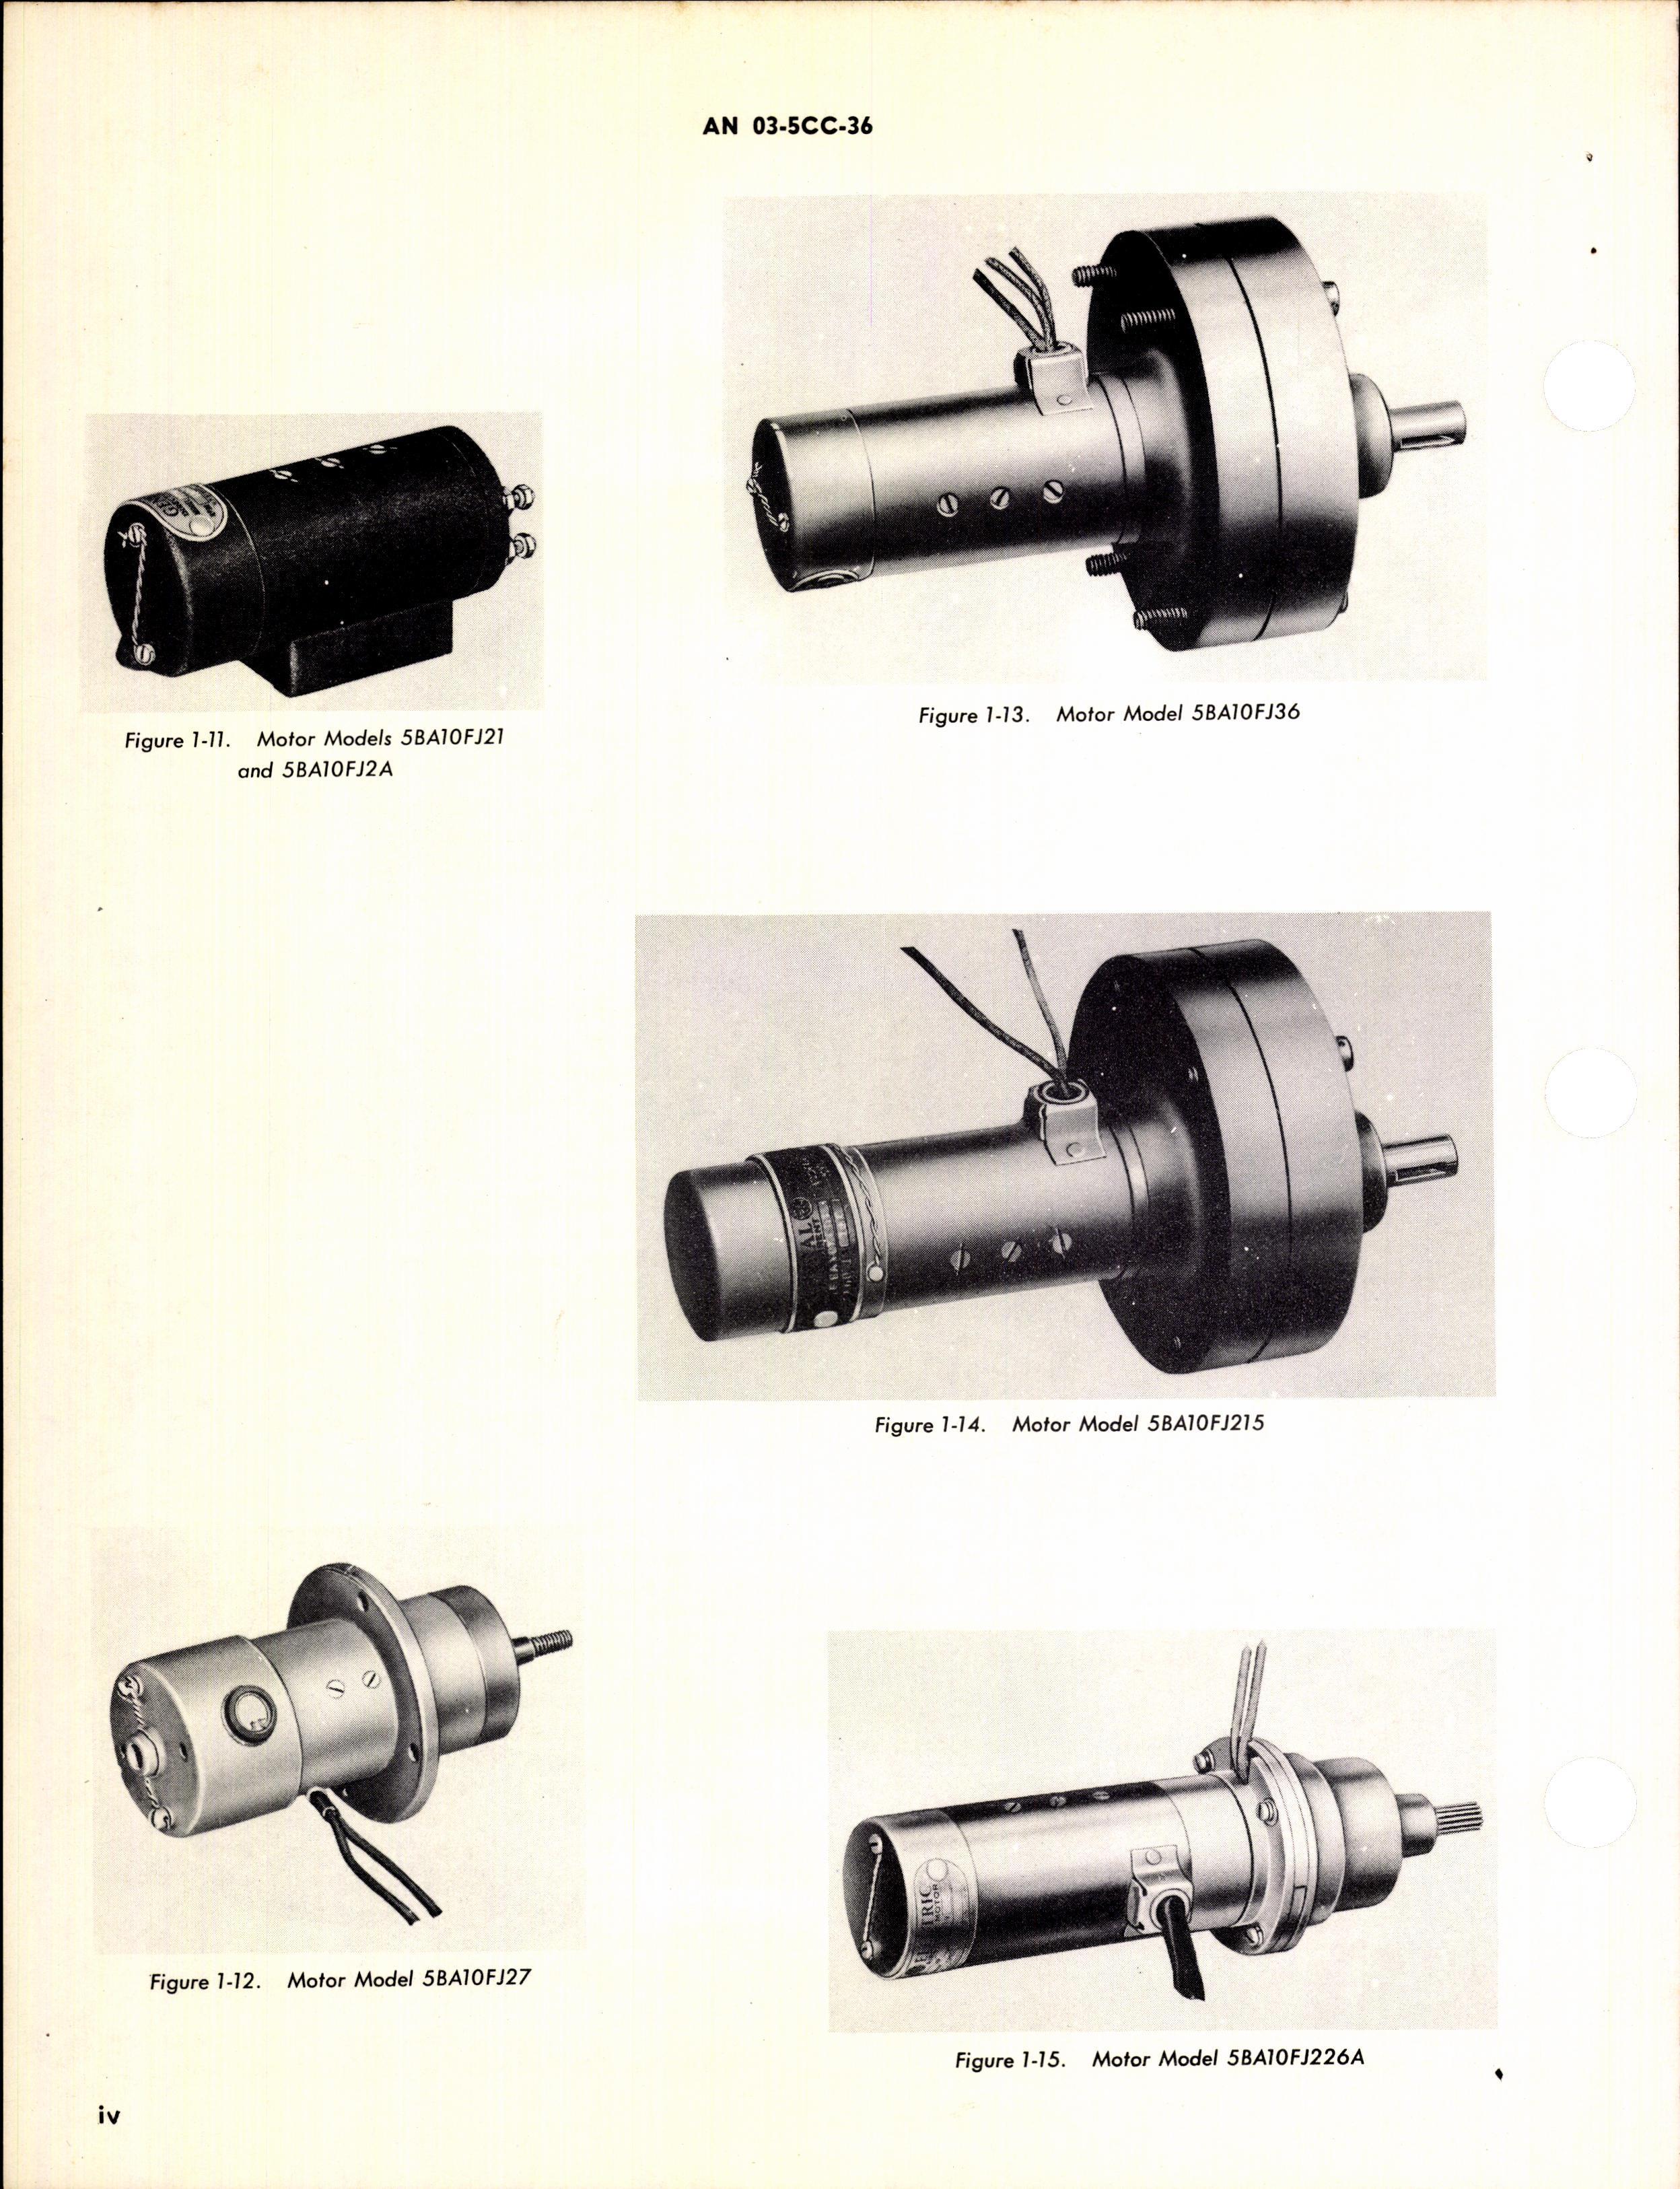 Sample page 6 from AirCorps Library document: Overhaul Instructions for General Electric Series 5BA10 Aircraft Motors